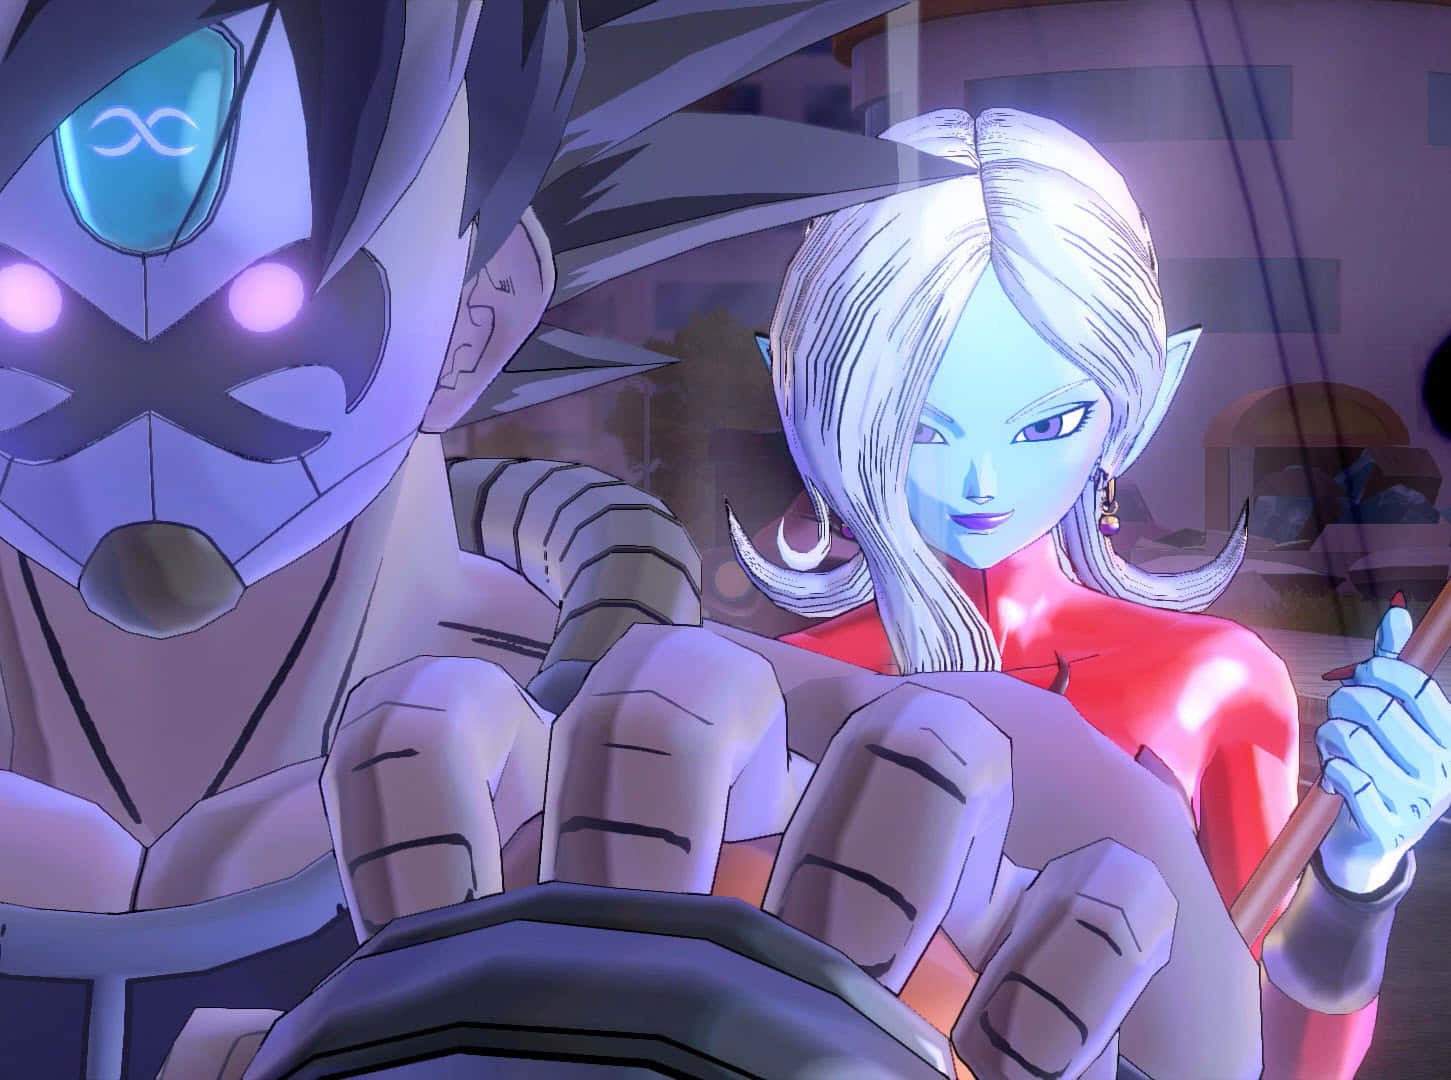 An action-packed experience awaits in DRAGON BALL XENOVERSE 2 Wallpaper